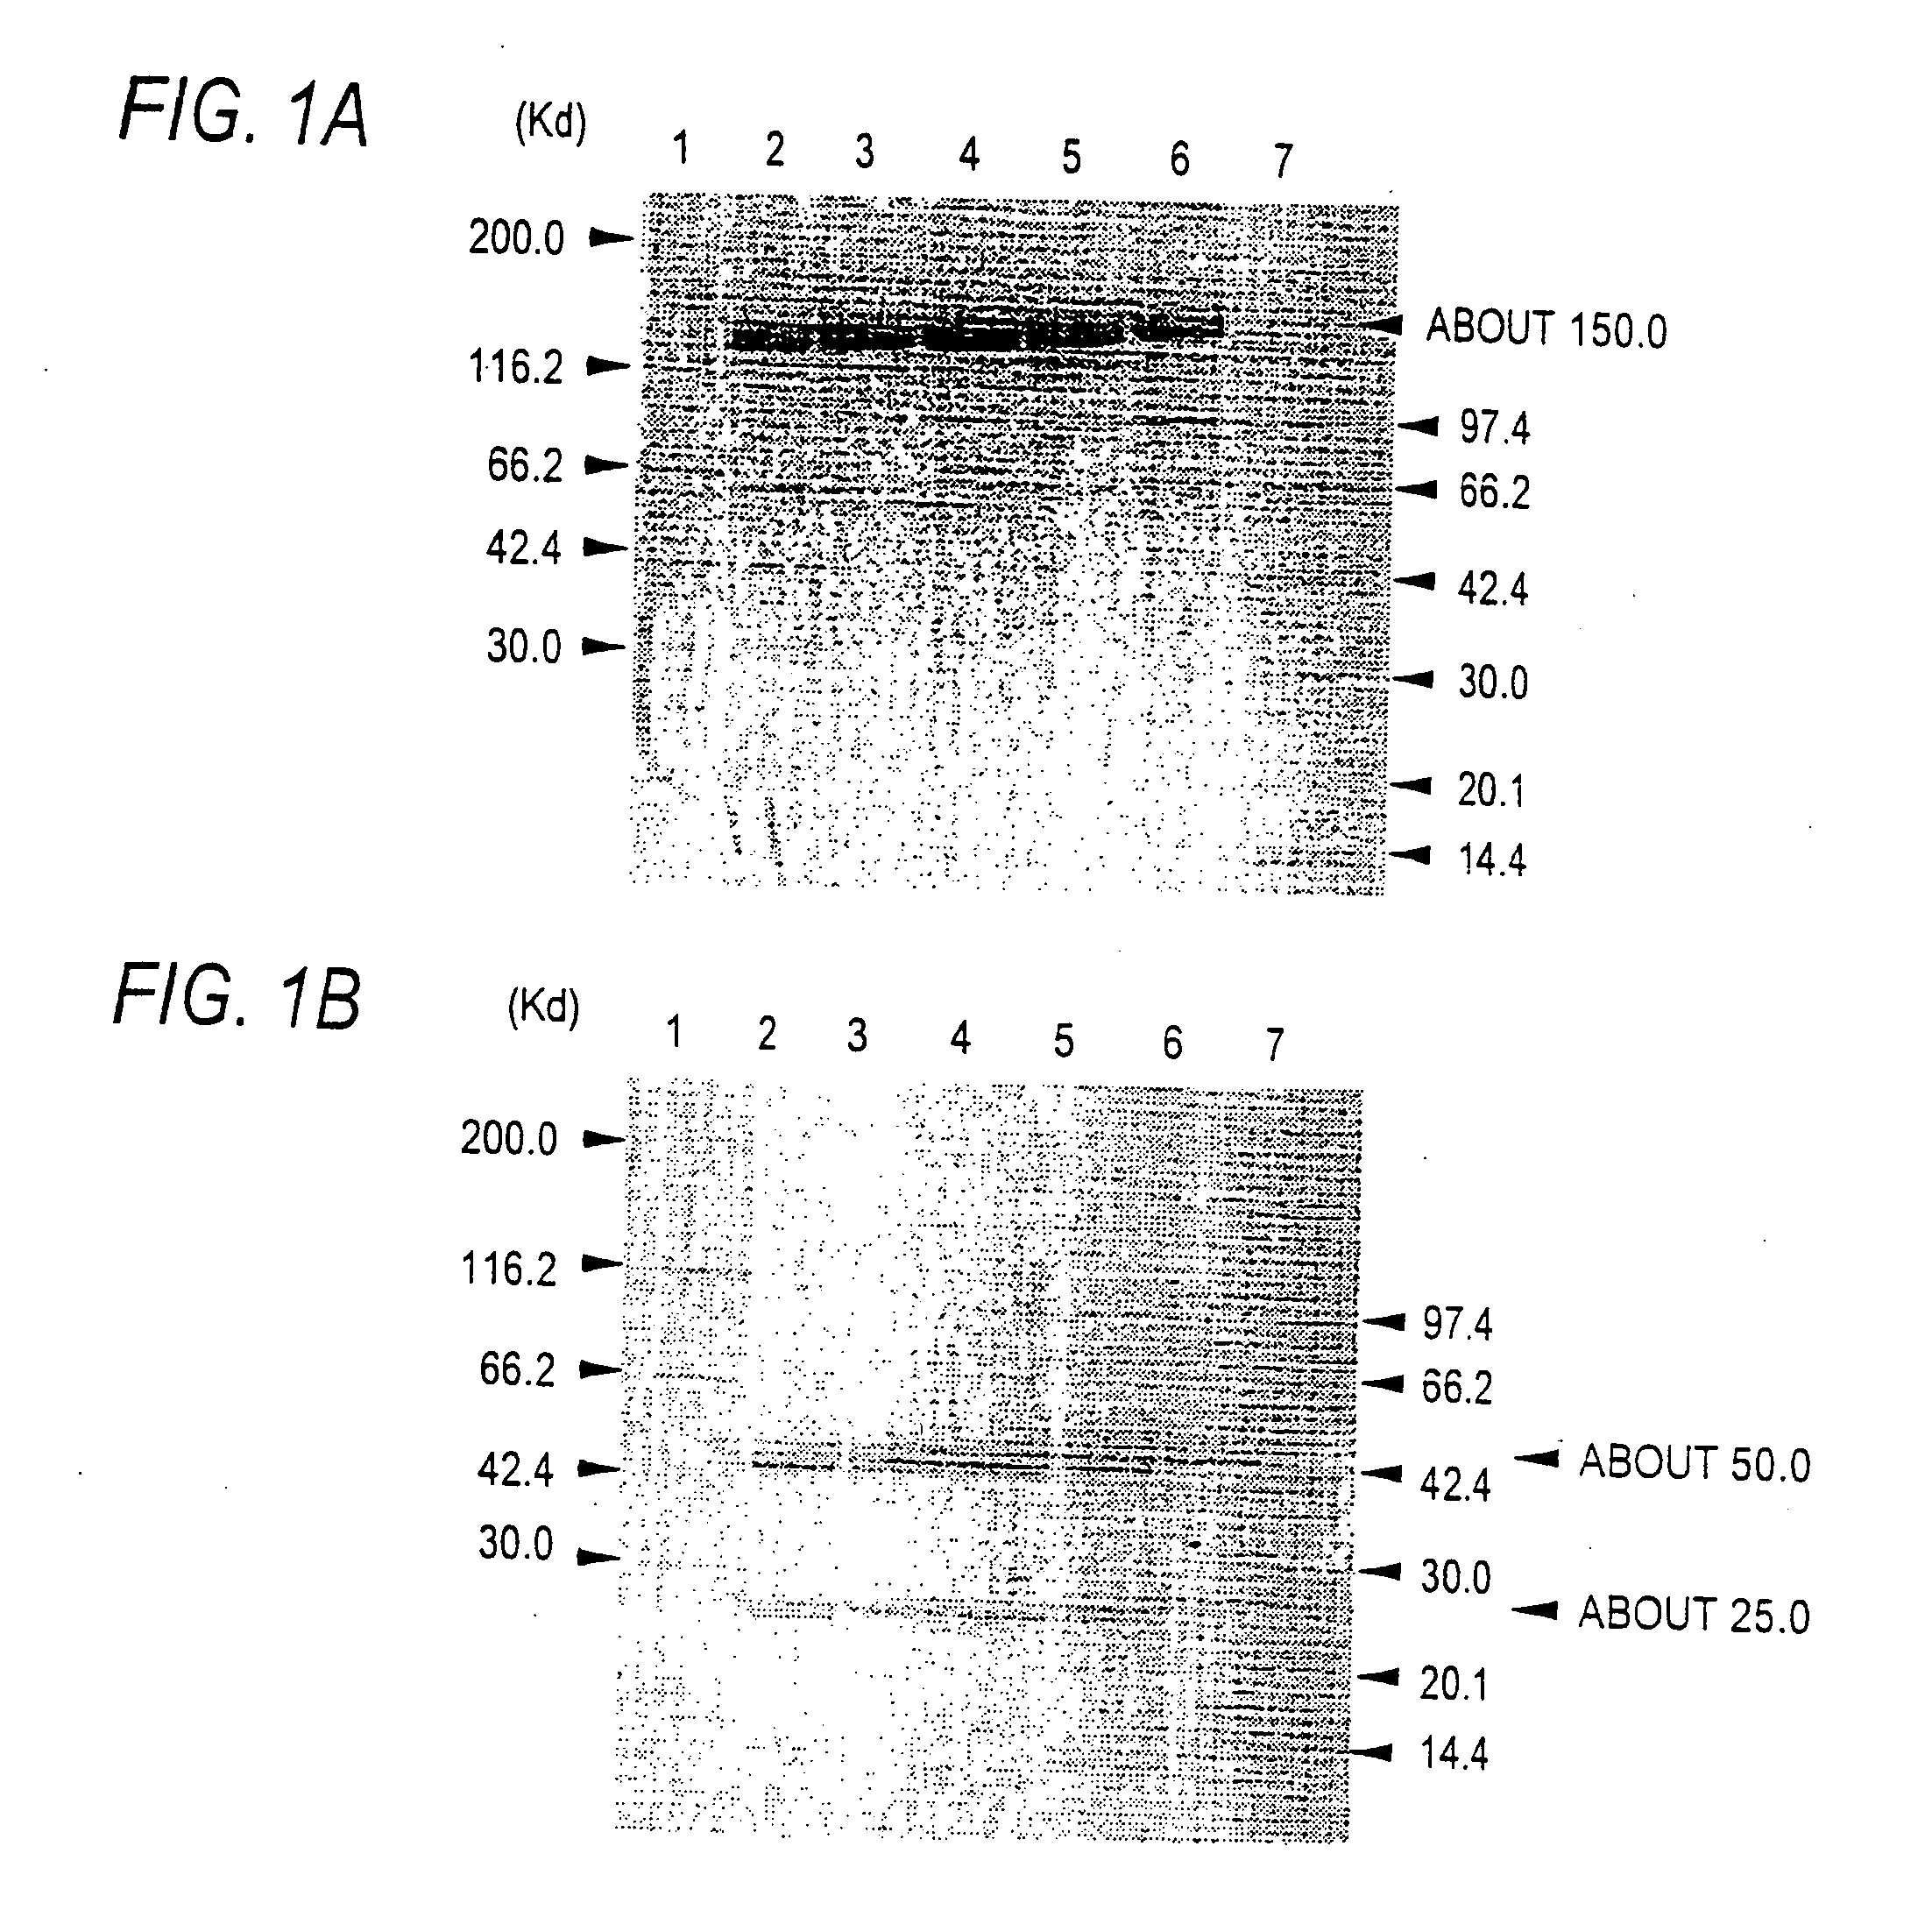 Antibody composition-producing cell